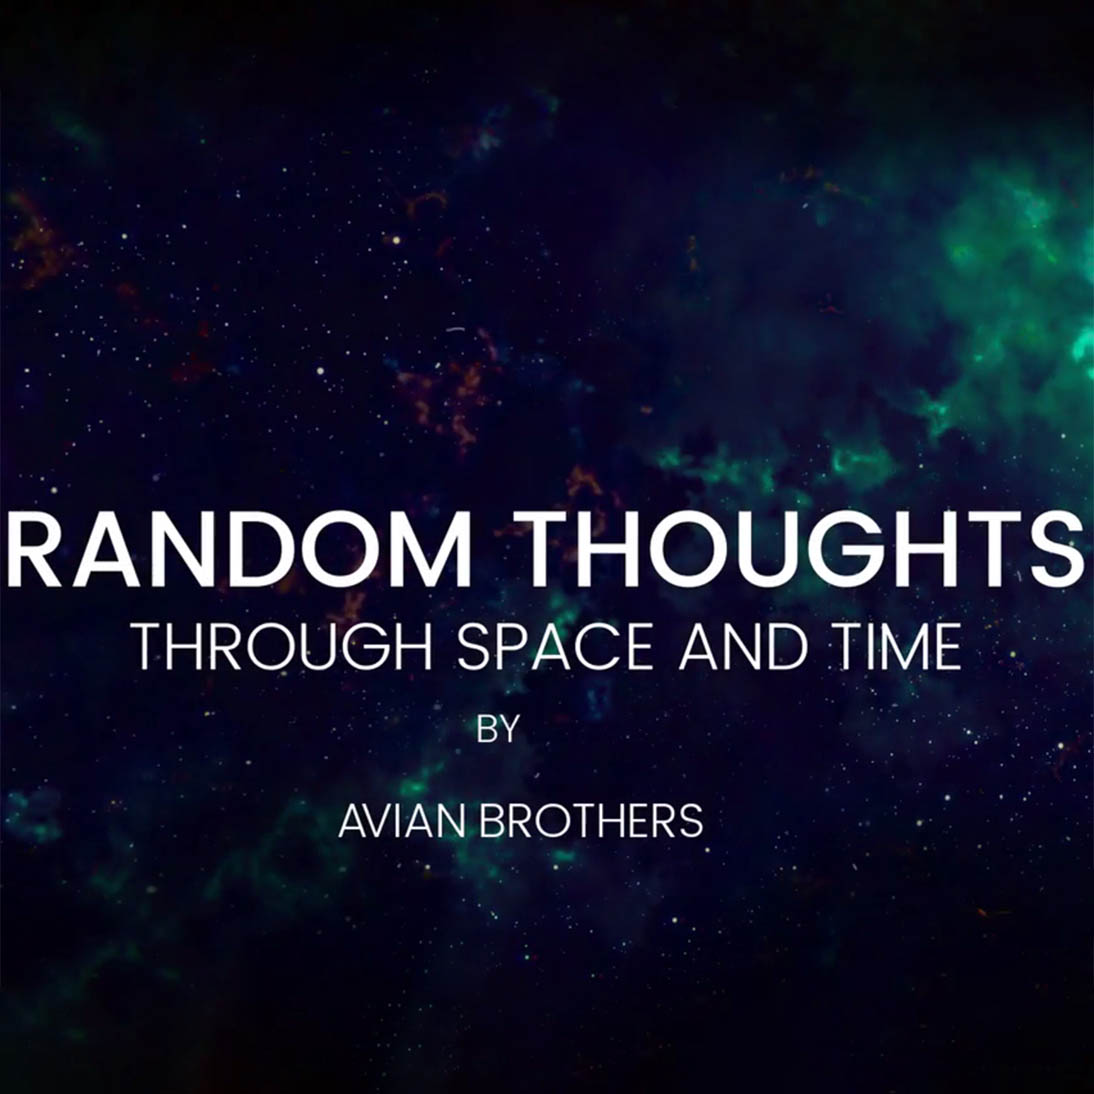 Avian Brothers - Random Thoughts Through Space and Time Main Album cover Music, original songs, albums, remixes and covers Created by Henrik Veres , #henrikveres #avianbrothers